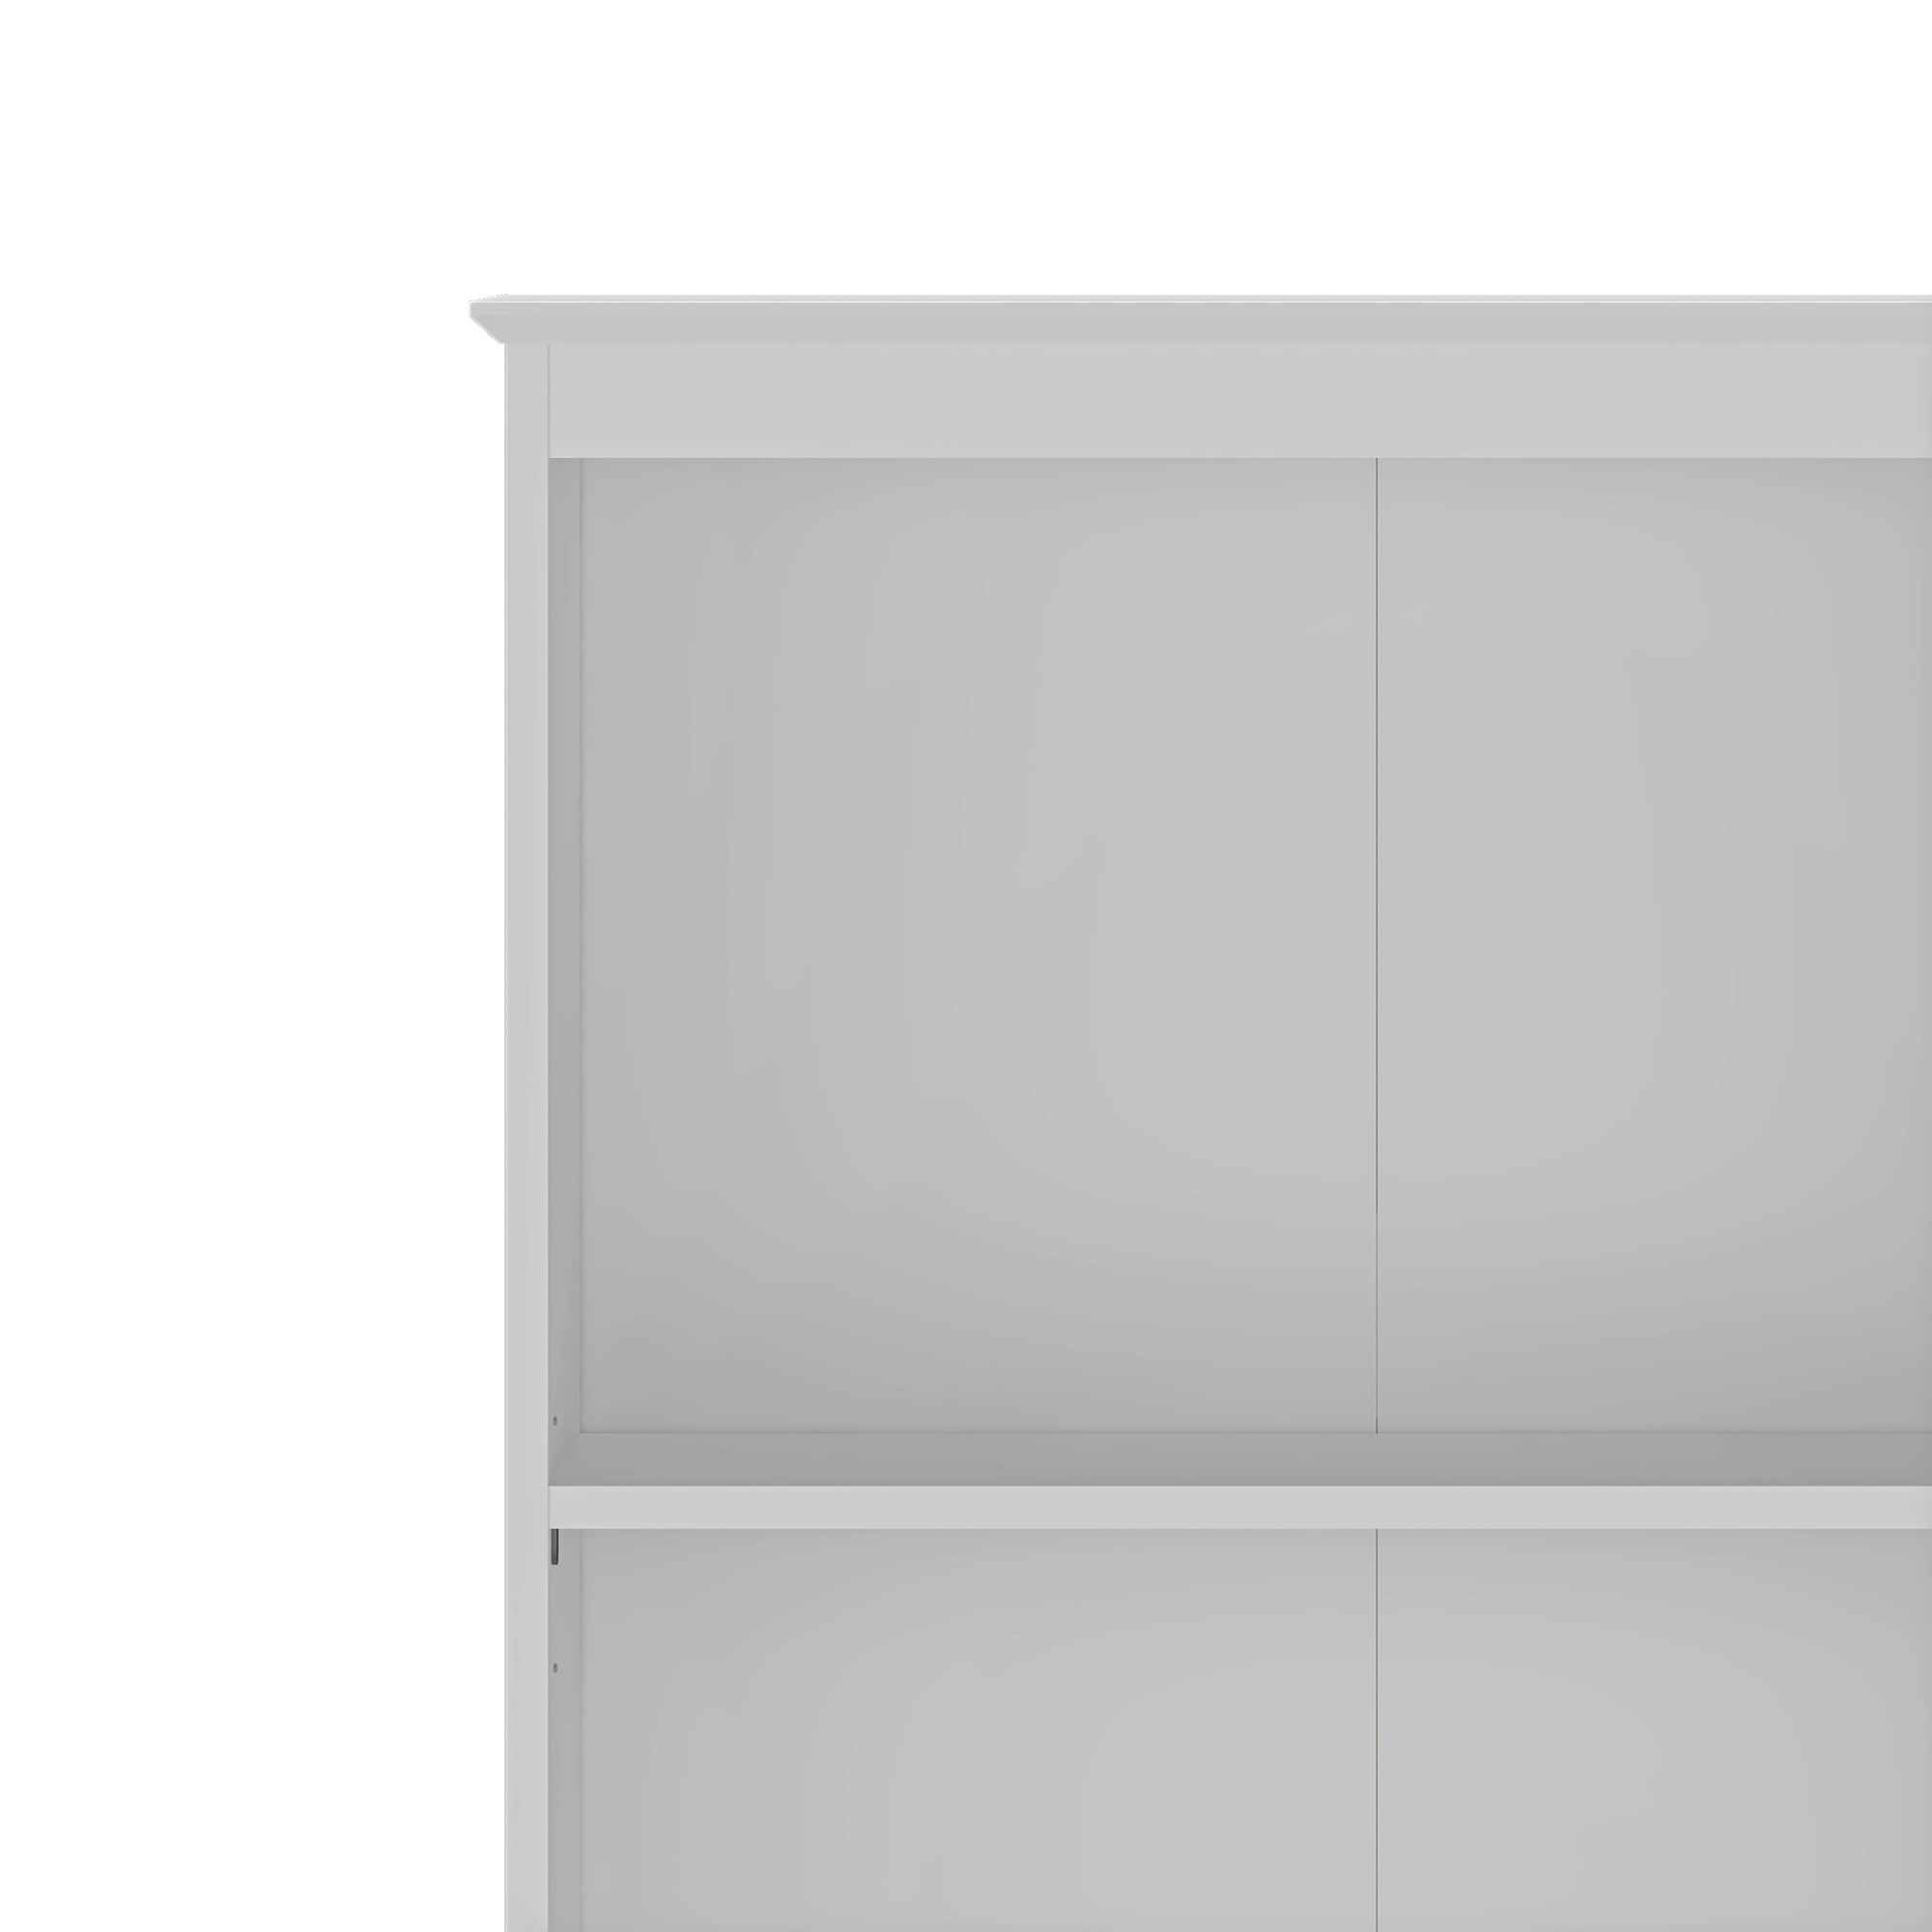 Hillsdale Campbell Wood 3 Shelf Kids Bookcase, White - image 5 of 11